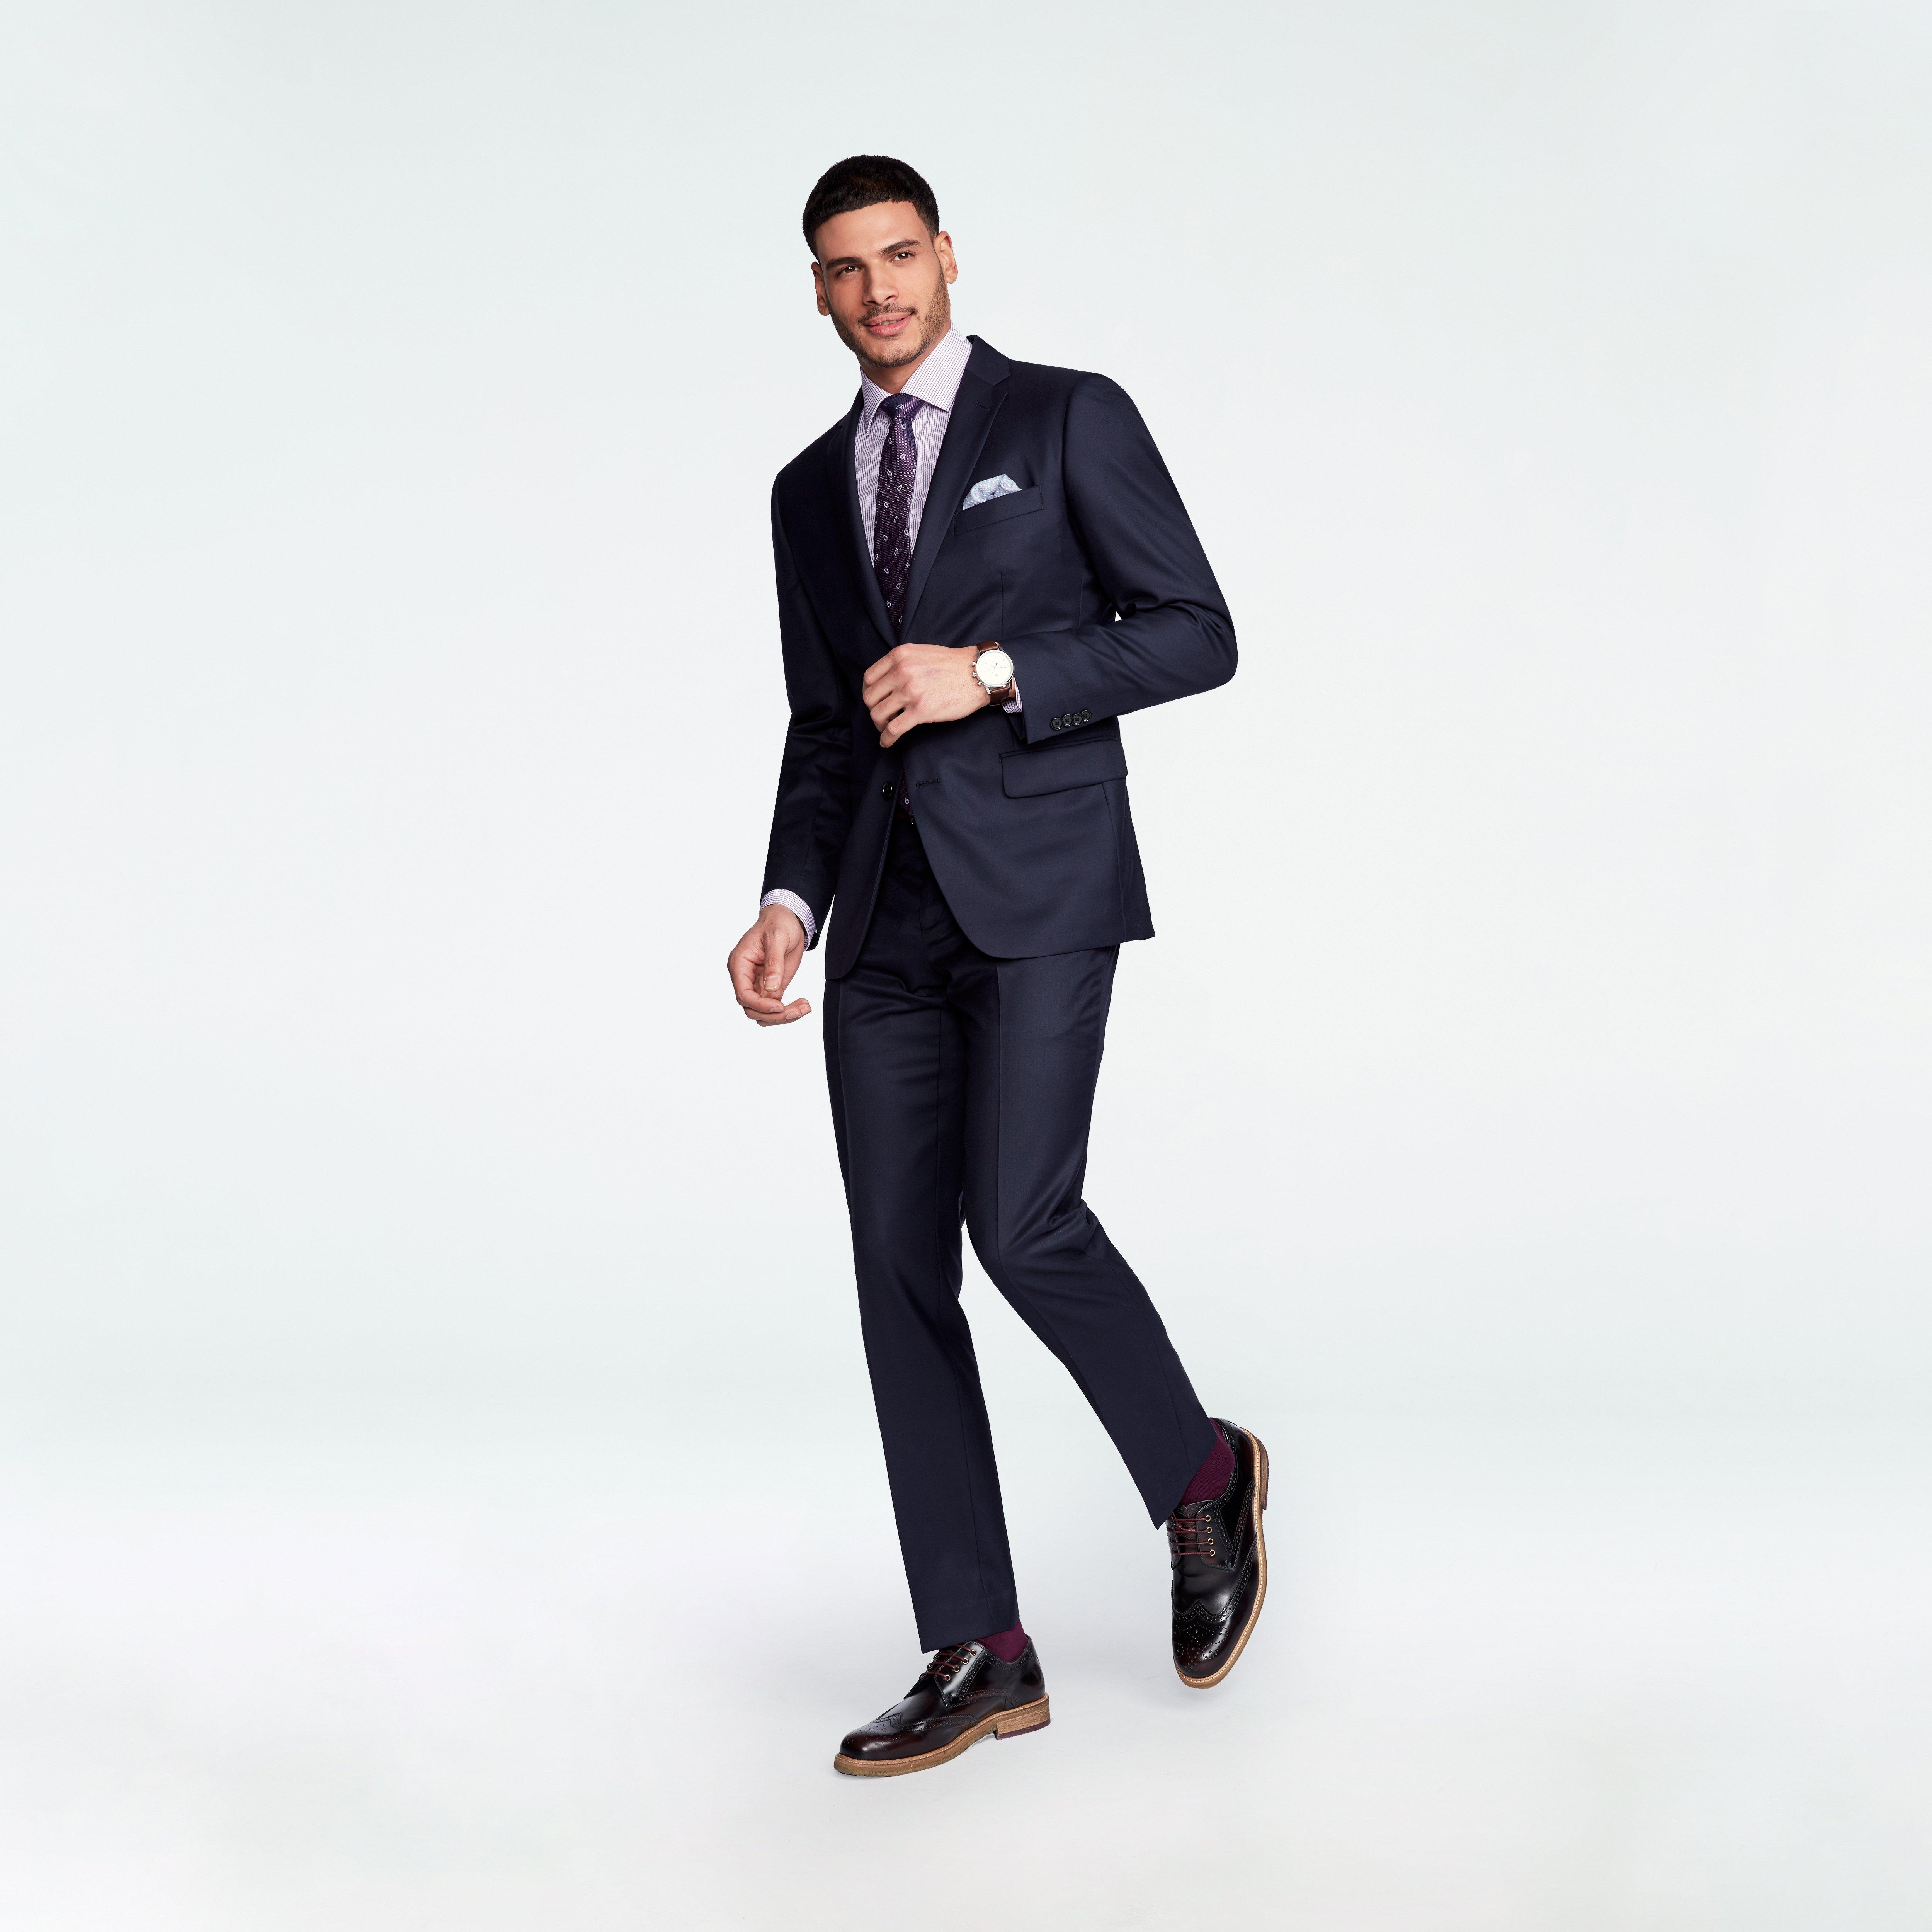 Custom Suits Made For You - Harrogate Midnight Blue Suit | INDOCHINO